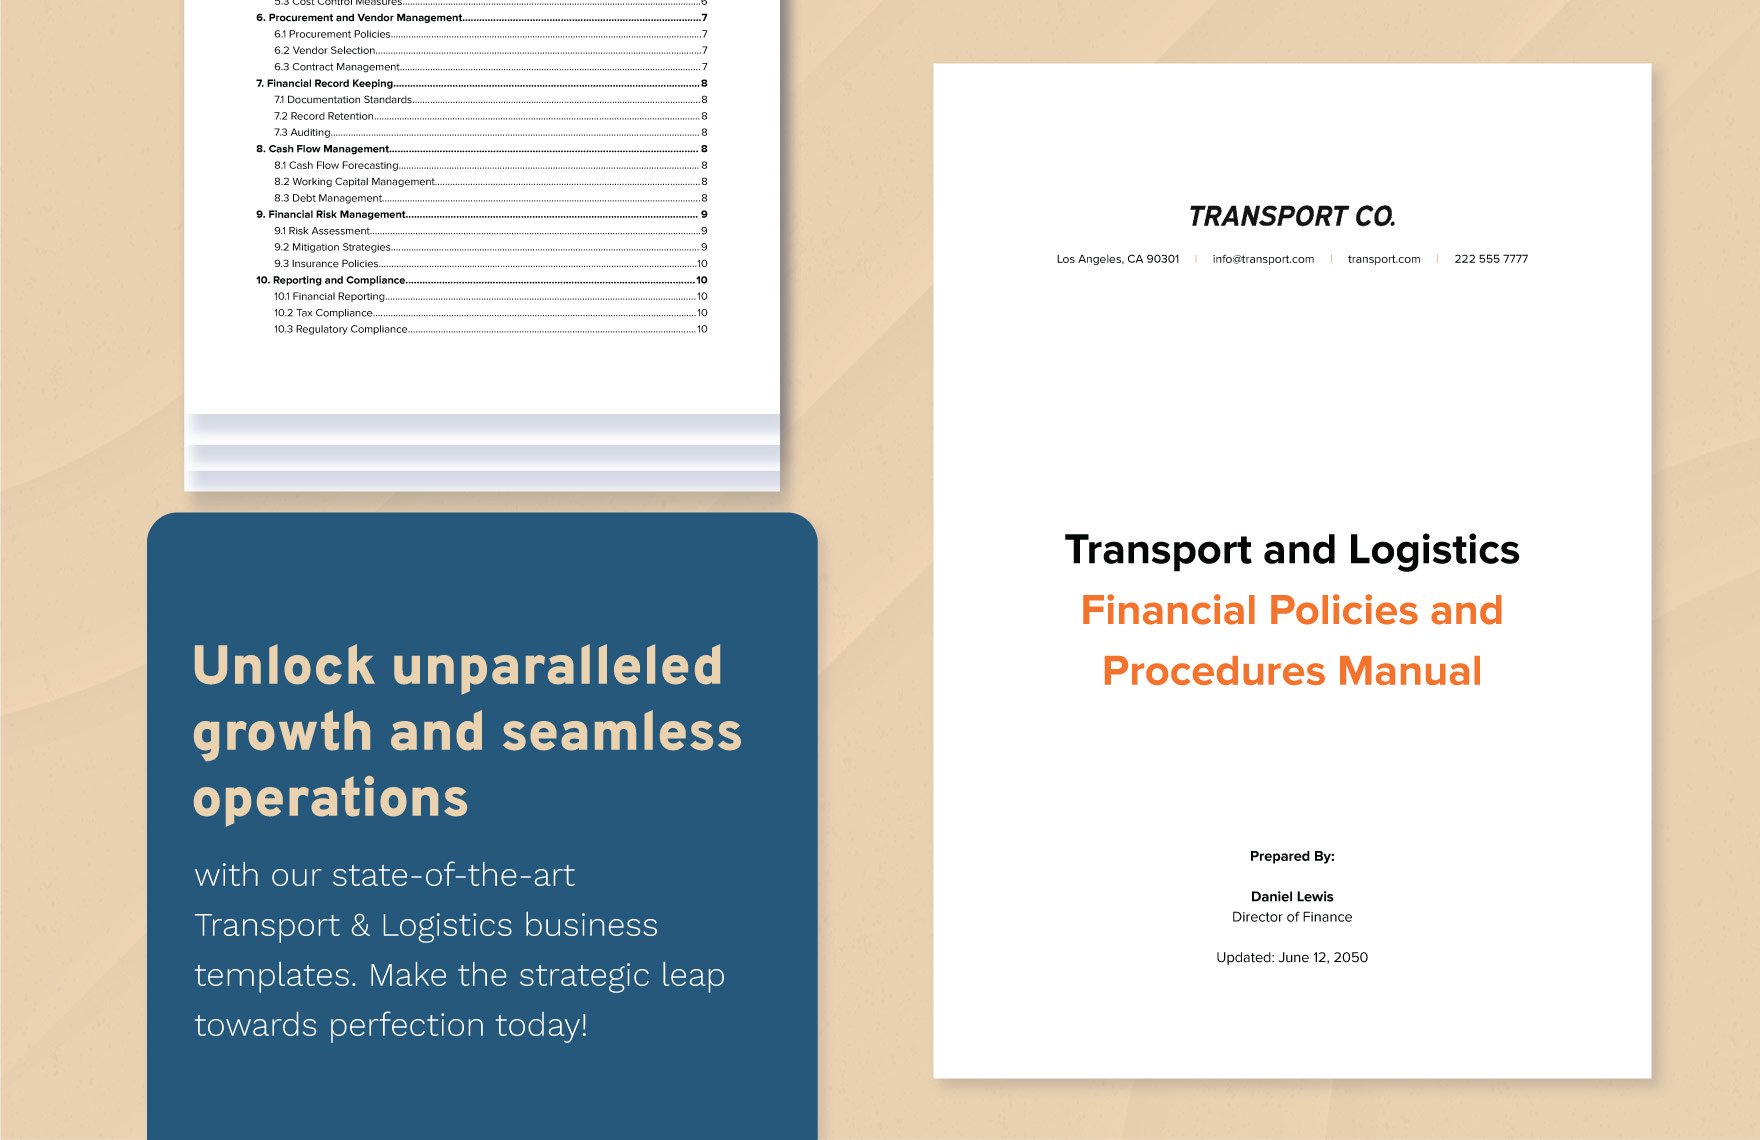 Transport and Logistics Financial Policies and Procedures Manual Template